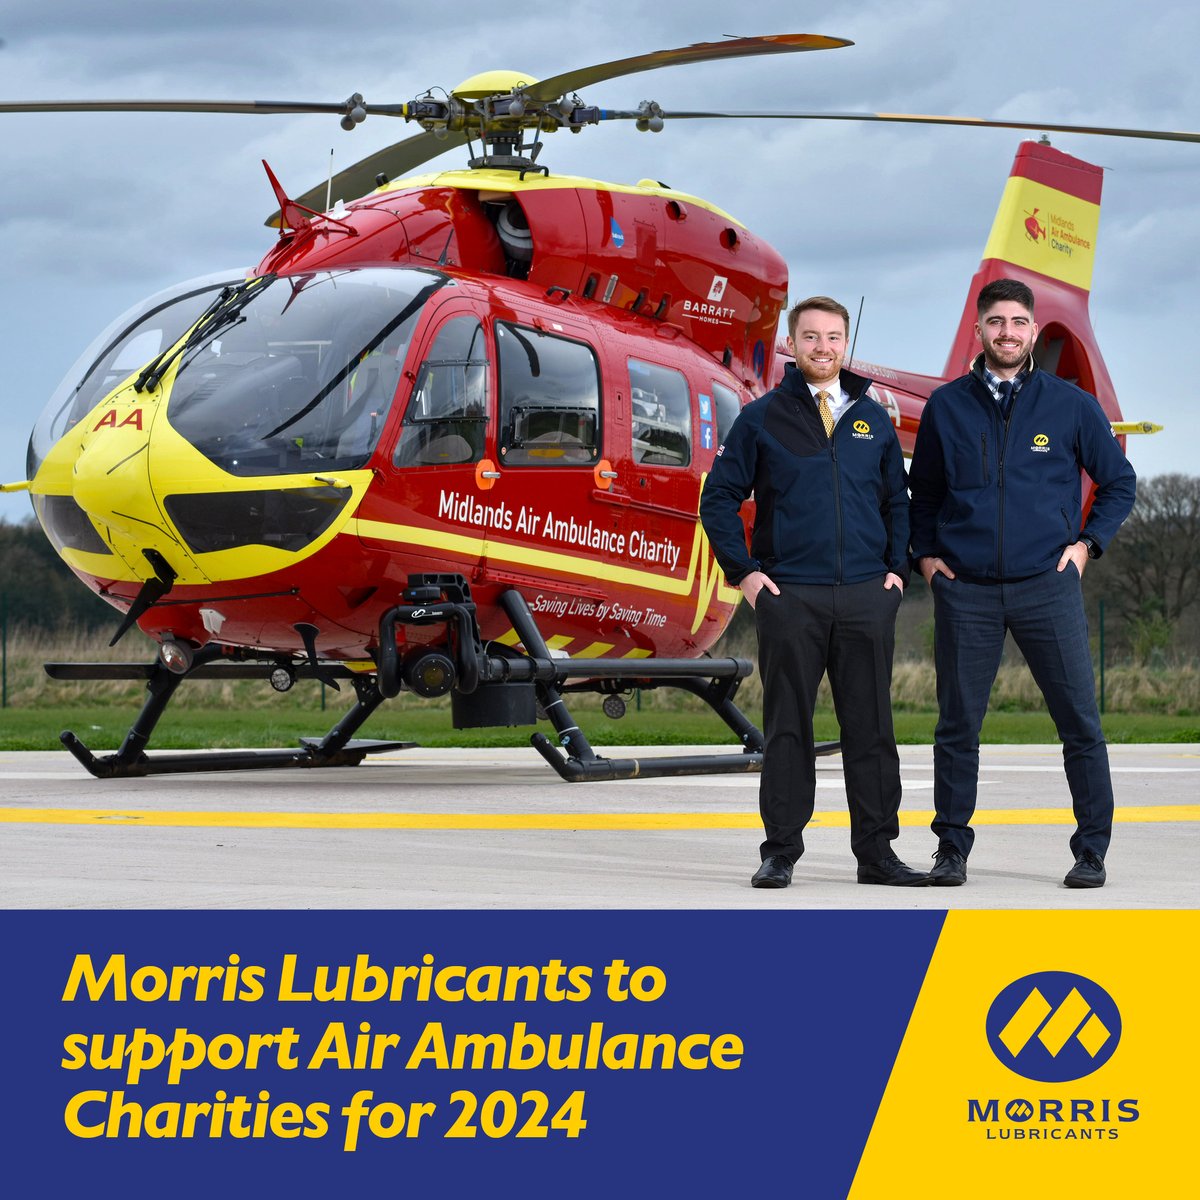 @Morrisoil is delighted to announce that its chosen charities for 2024 are @MAA_Charity, @air_ambulance, & @GBairambulance. There's lots of fundraising planned for 2024 including a Tandem Skydive. To read about this daring challenge & donate, click here: ow.ly/V0i350QXz0E